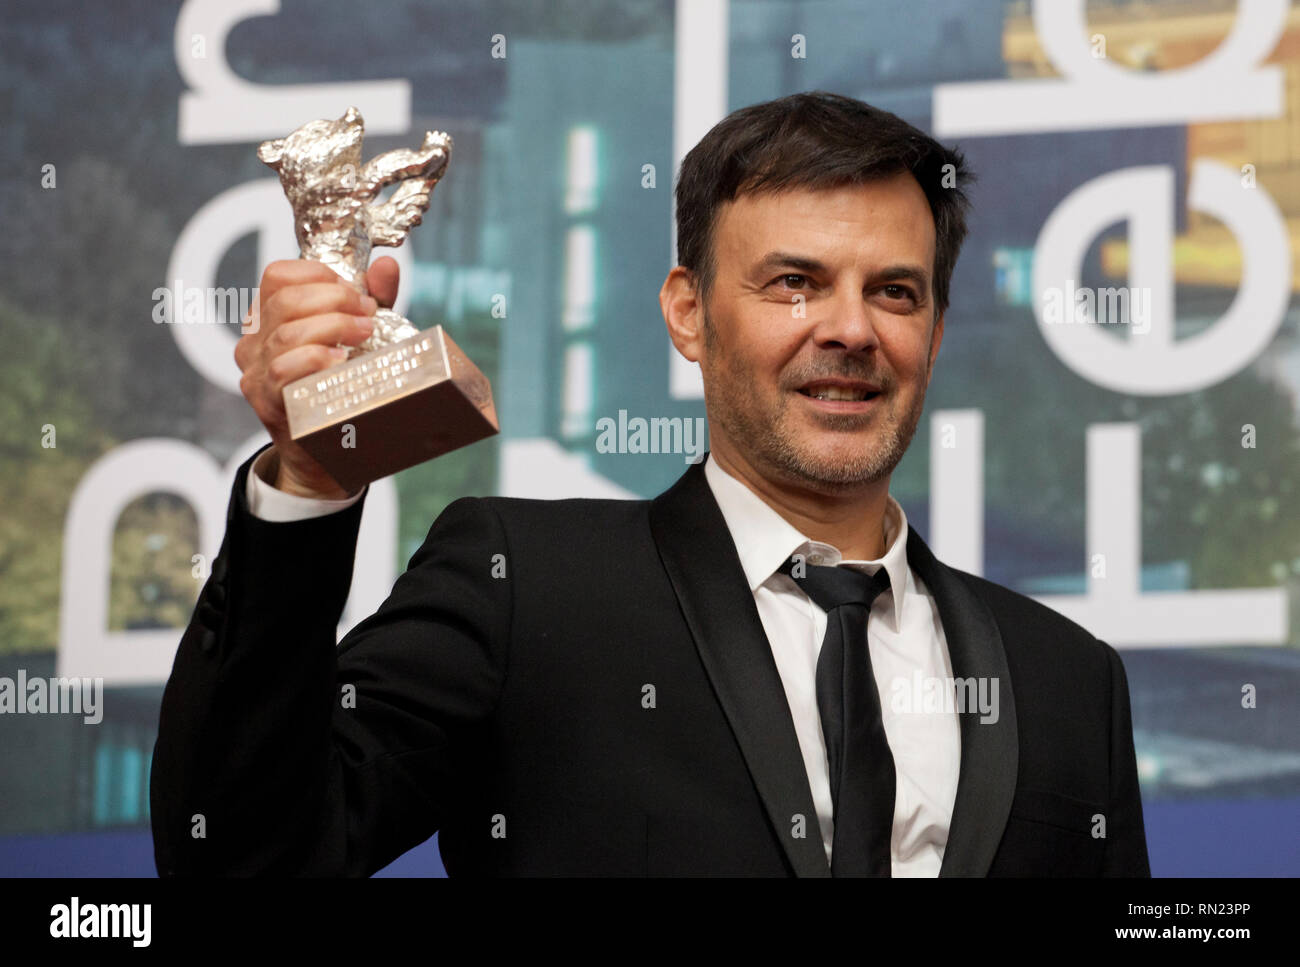 Berlin, Germany. 16th Feb 2019. Director Francois Ozon, winner of the Silver Bear Grand Jury Prize for the film By the Grace of God at the award winners press conference at the 69th Berlinale International Film Festival, on Saturday 16th February 2019, Hotel Grand Hyatt, Berlin, Germany. Credit: Doreen Kennedy/Alamy Live News Stock Photo